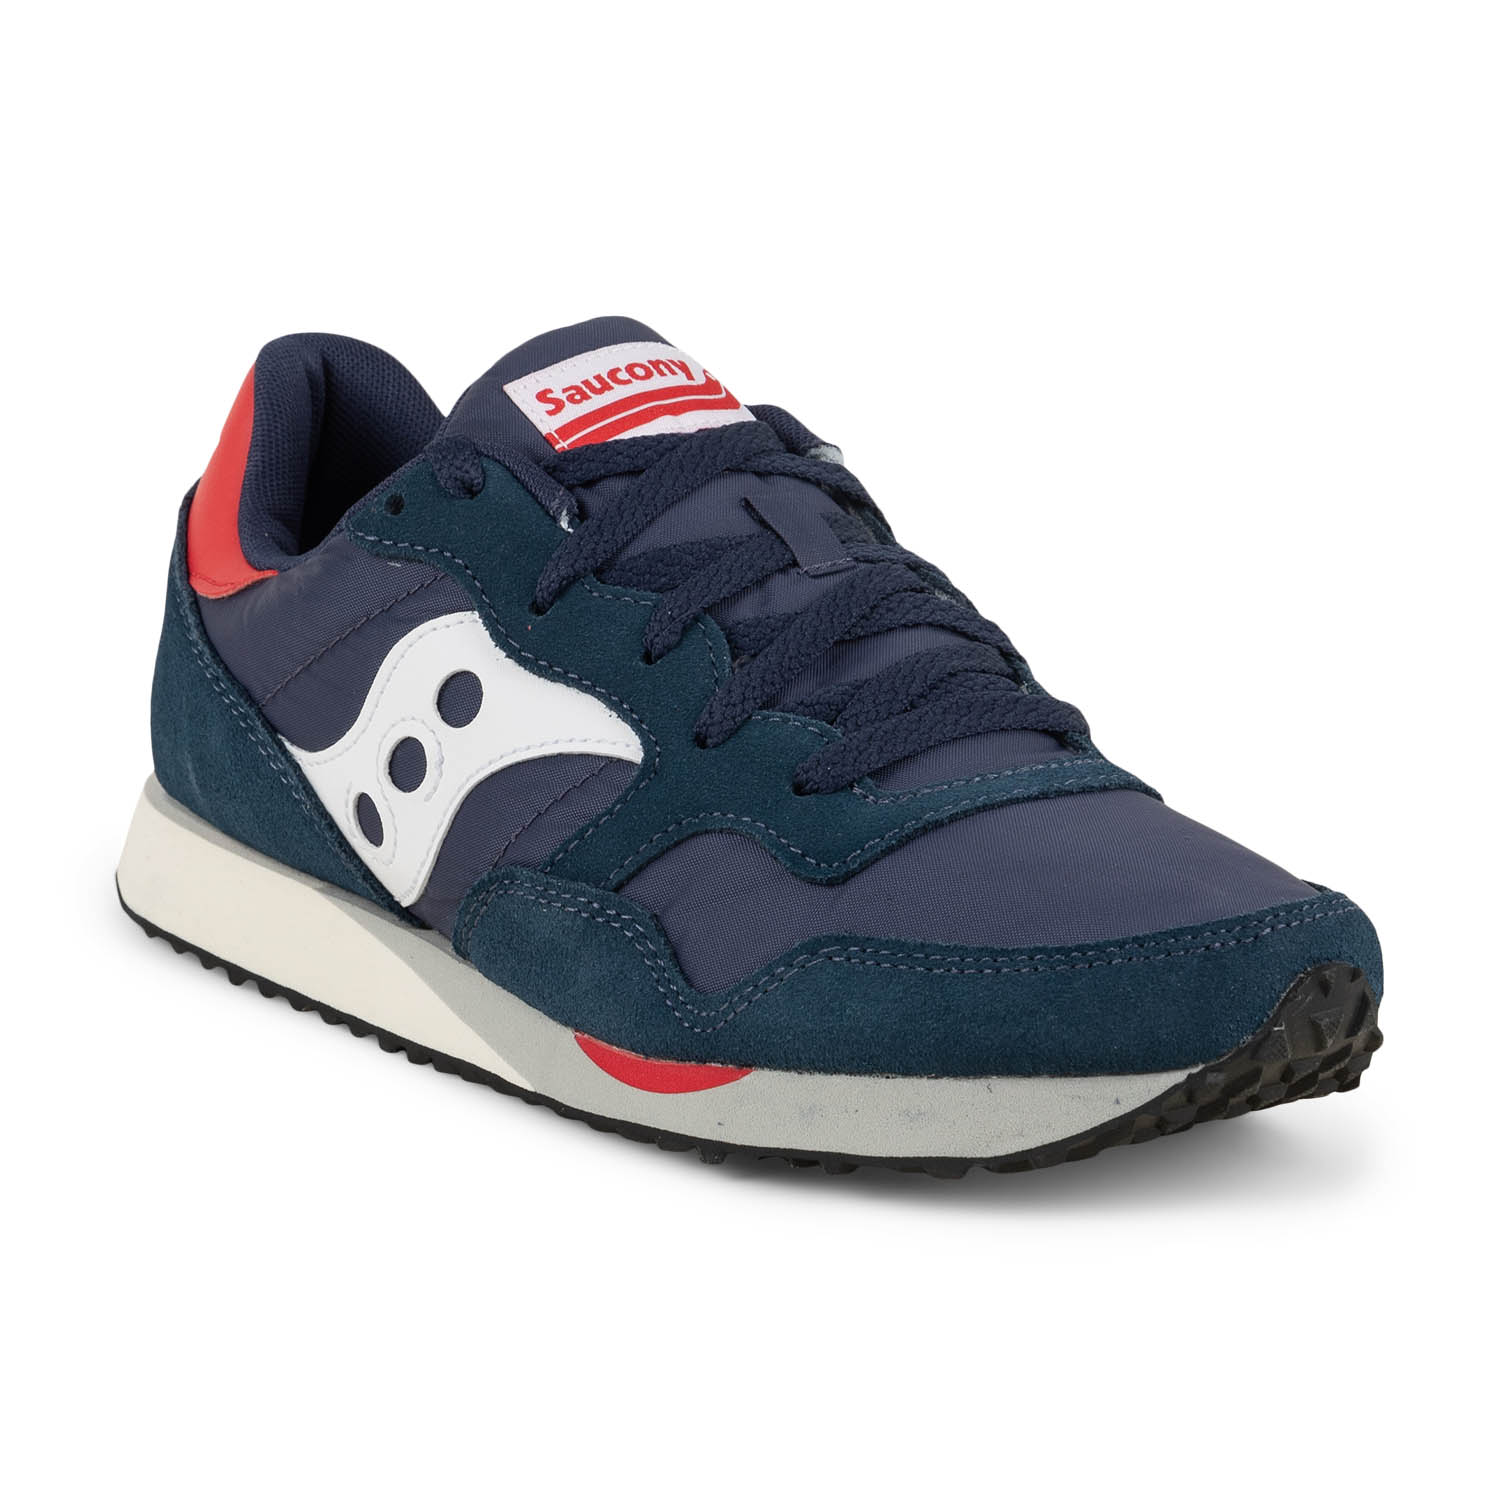 02 - DX TRAINER - SAUCONY - Baskets - Cuir / synthétique